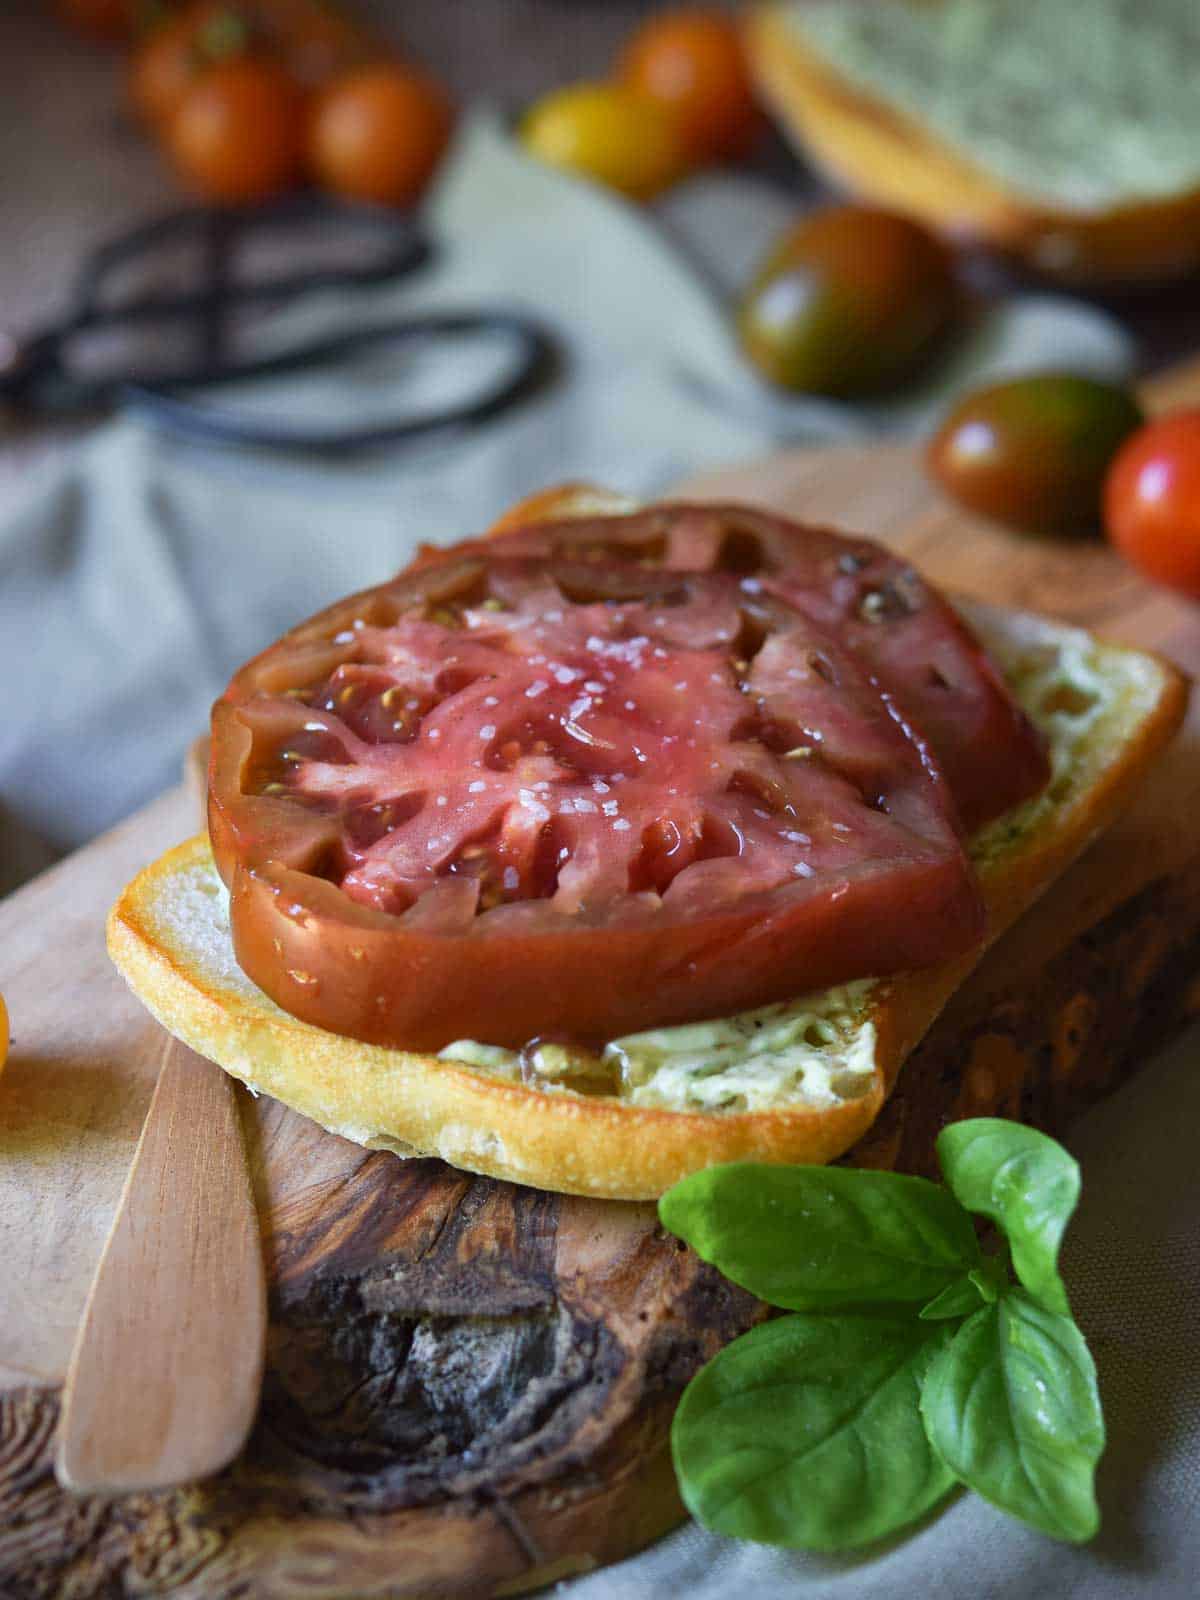 Sliced red tomatoes on bread with pesto mayo on a wood board.